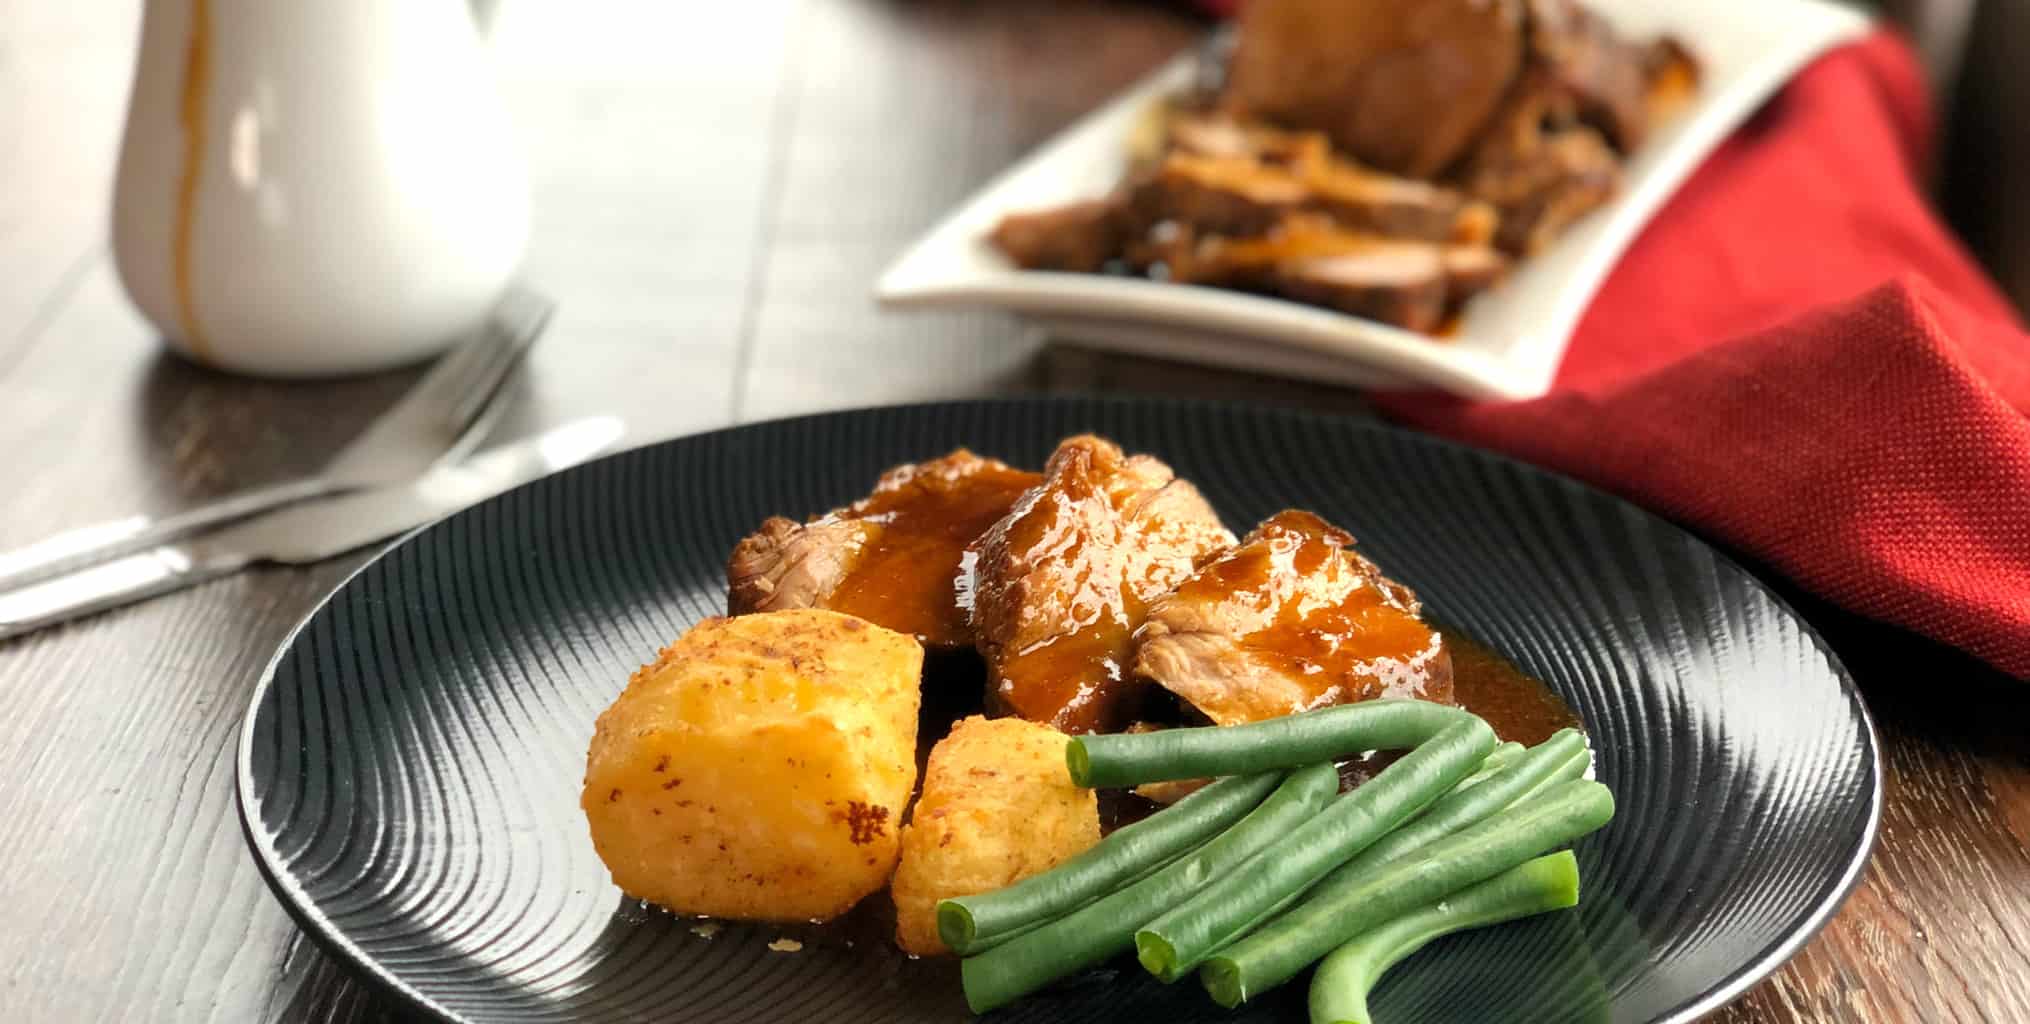 Roast Pork Dinner with Roast Potatoes and Green Beans